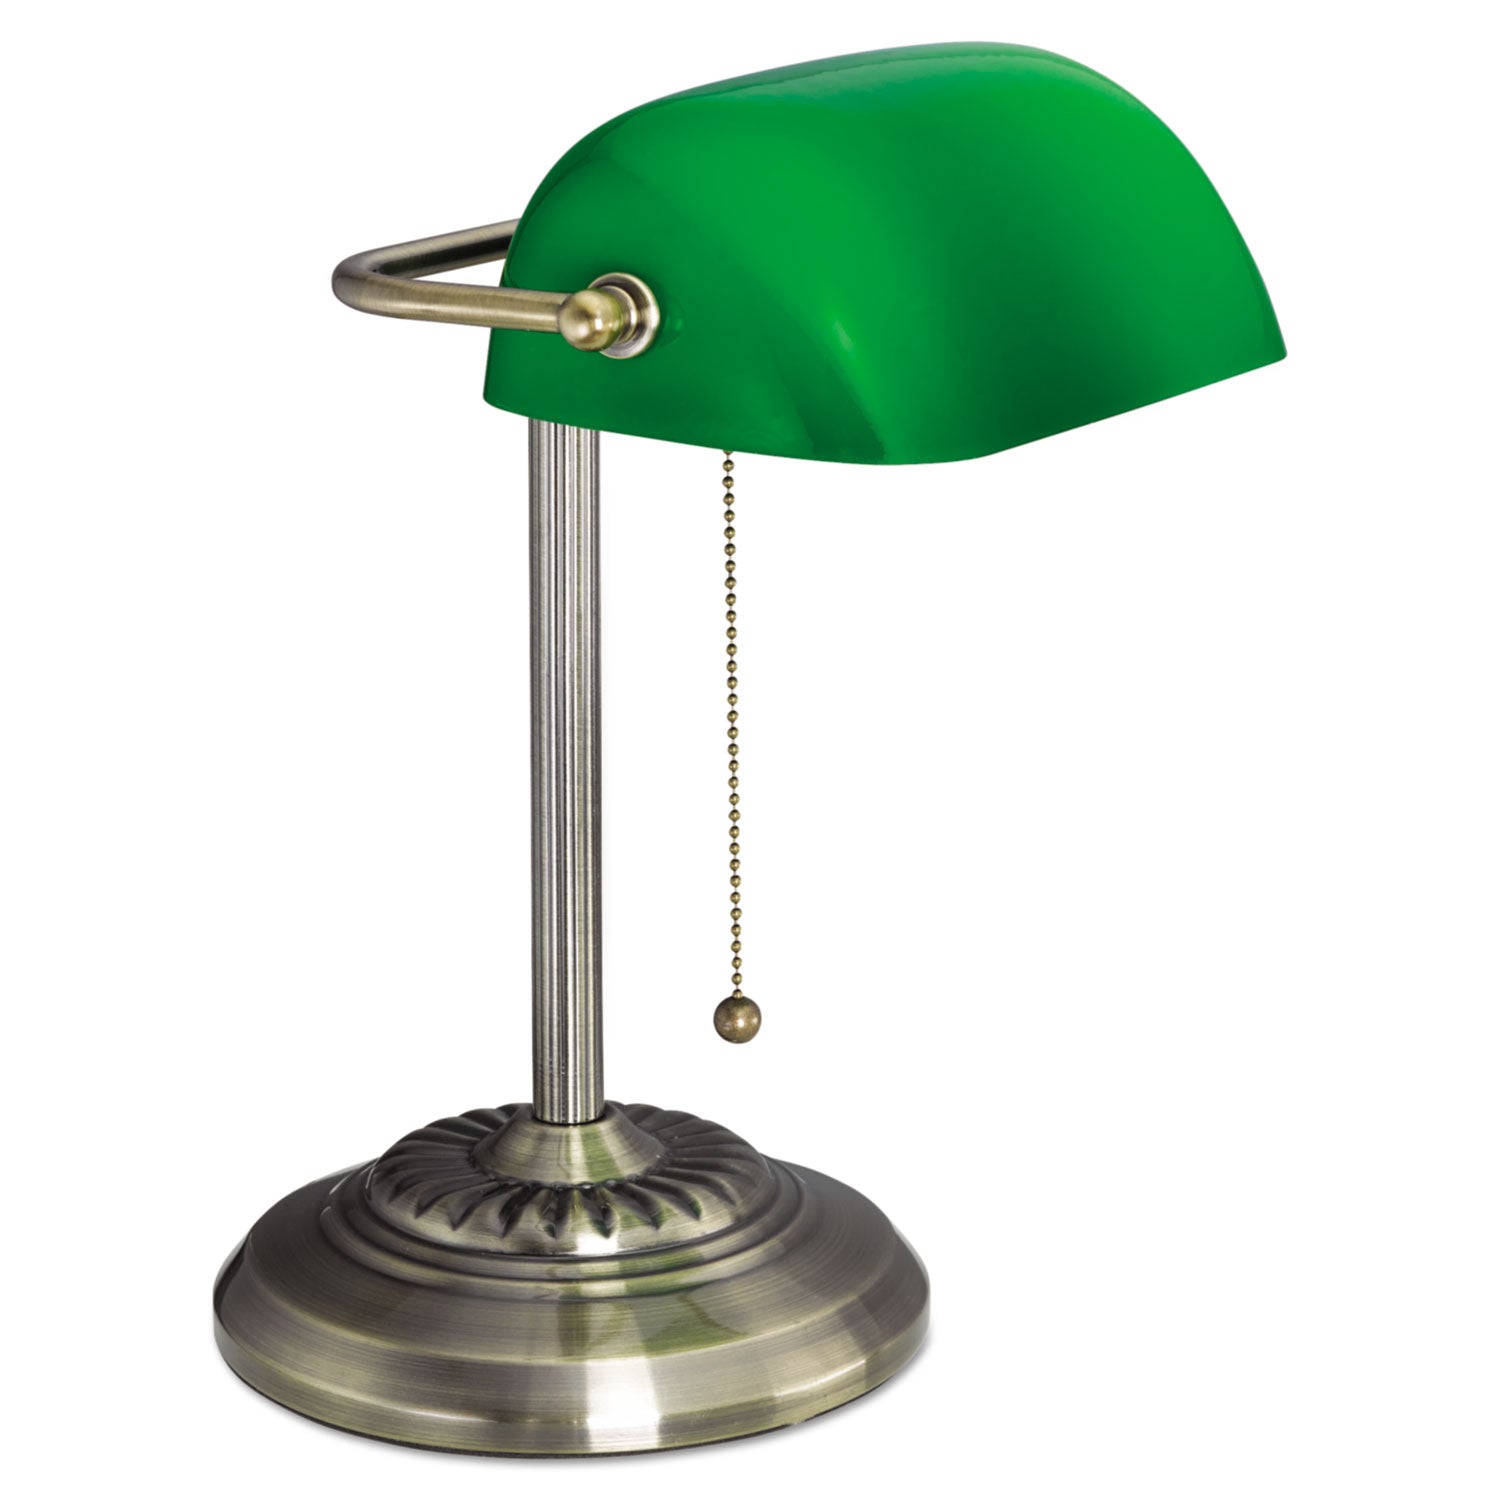 traditional-bankers-lamp-green-glass-shade-105w-x-11d-x-13h-antique-brass_alelmp557ab - 2